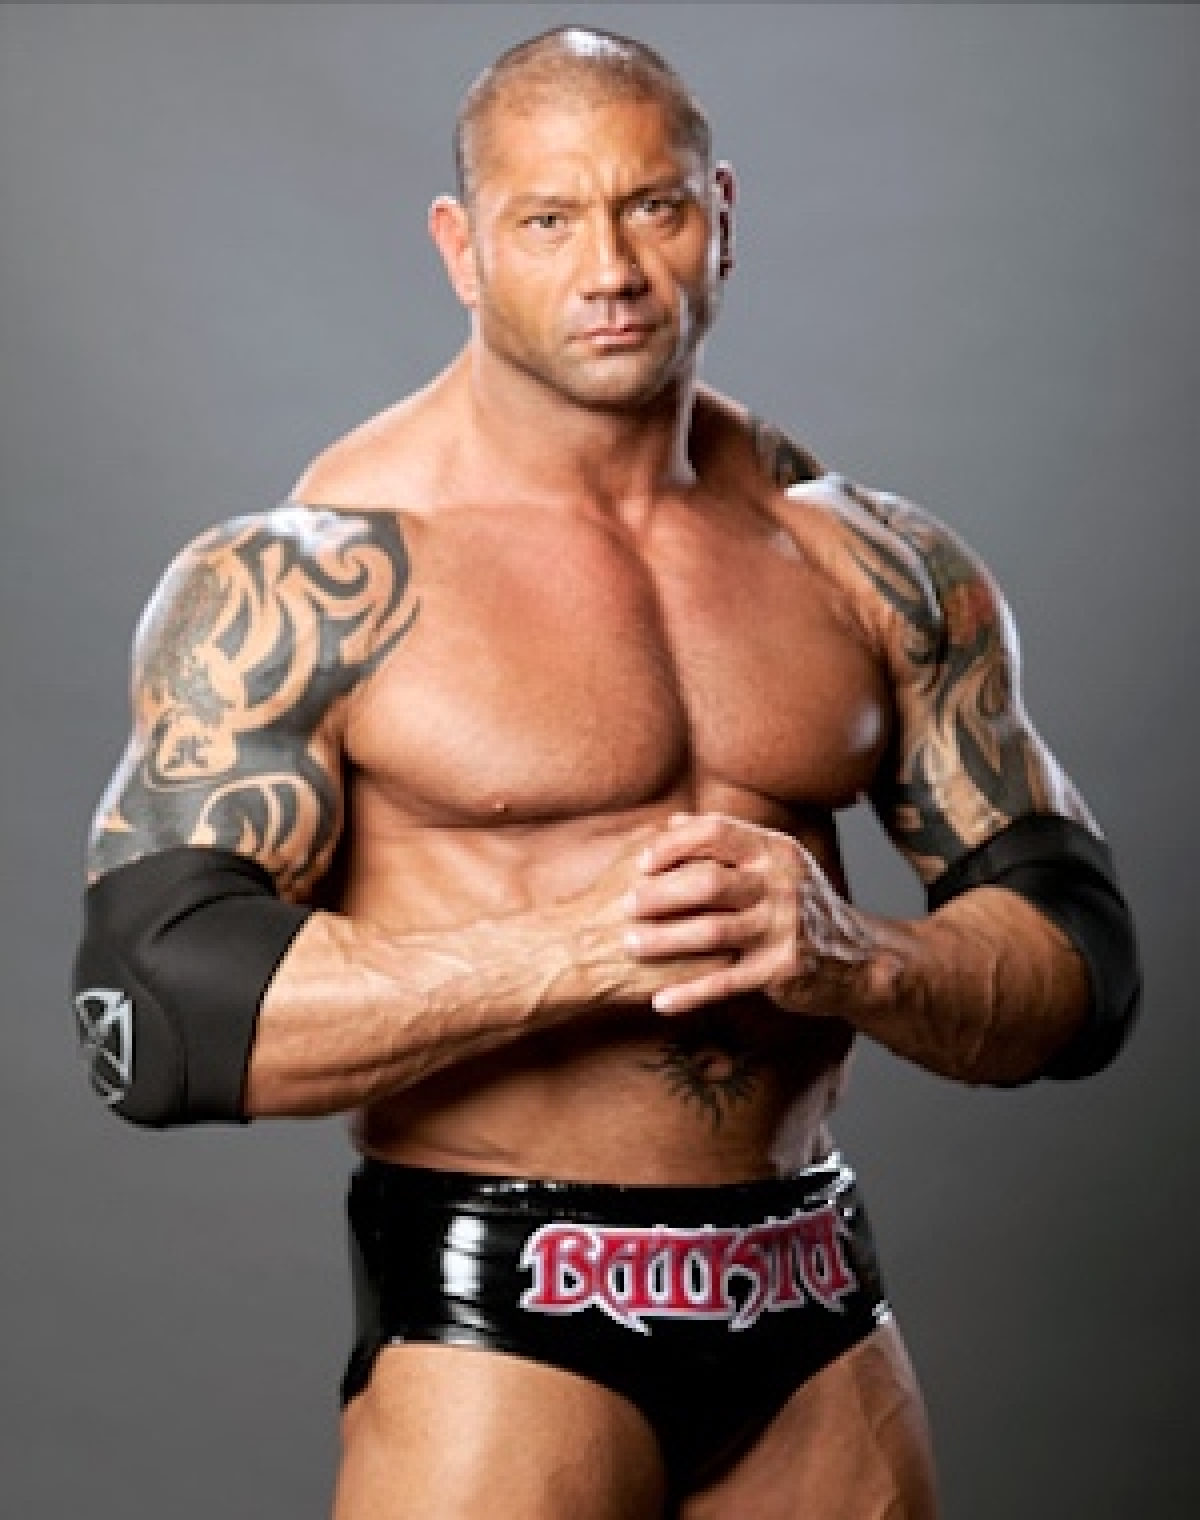 Batista Could Be WWE Hall Of Fame 2018 Headliner?